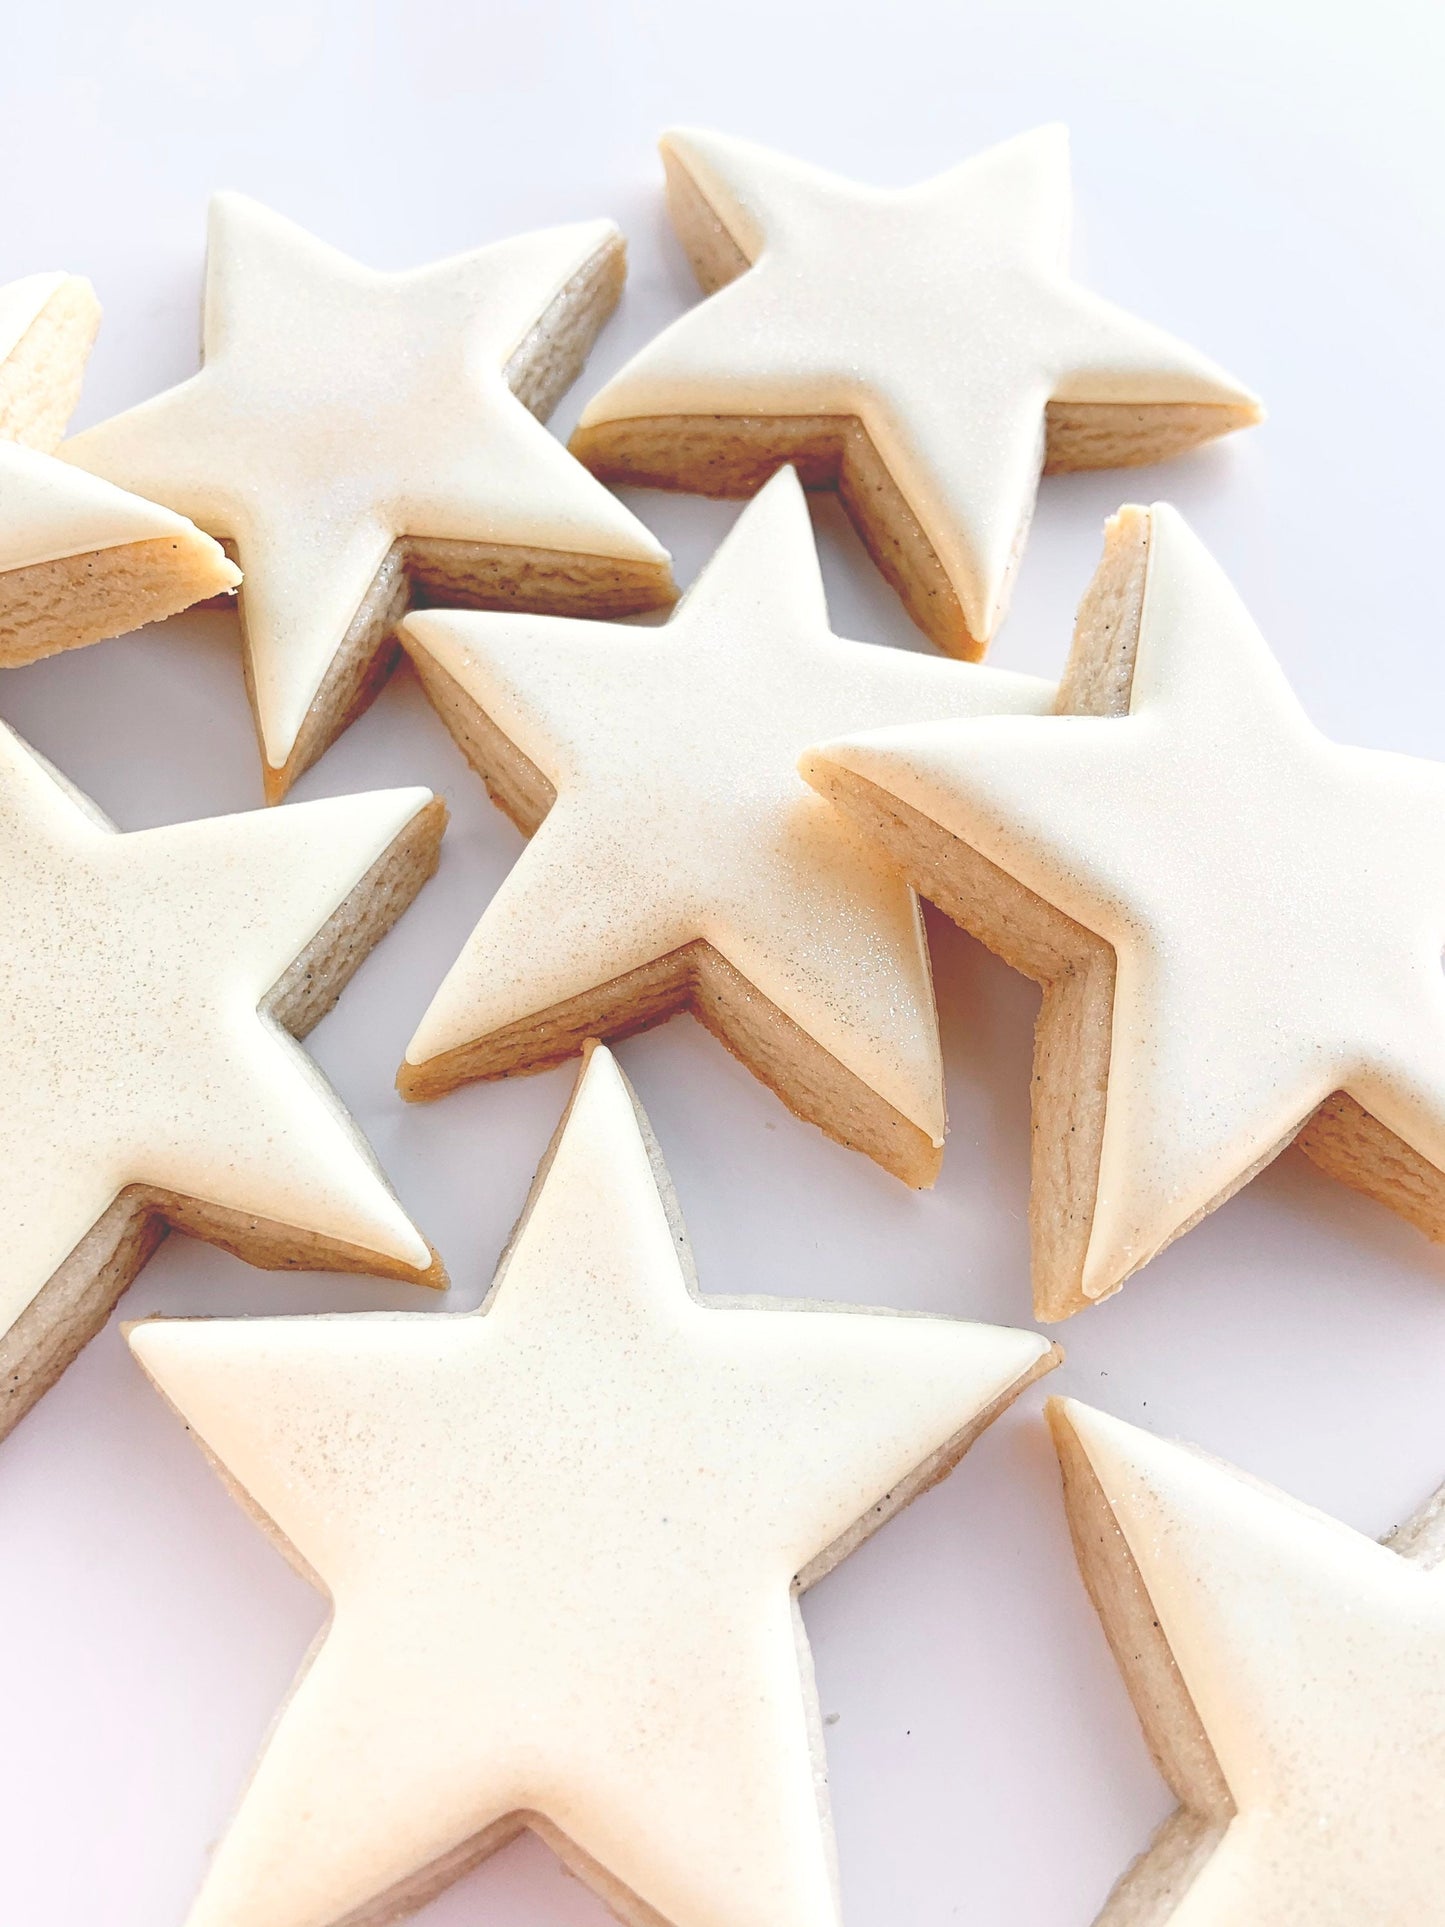 Star 1, Star 2, or Moon Cookie Cutters